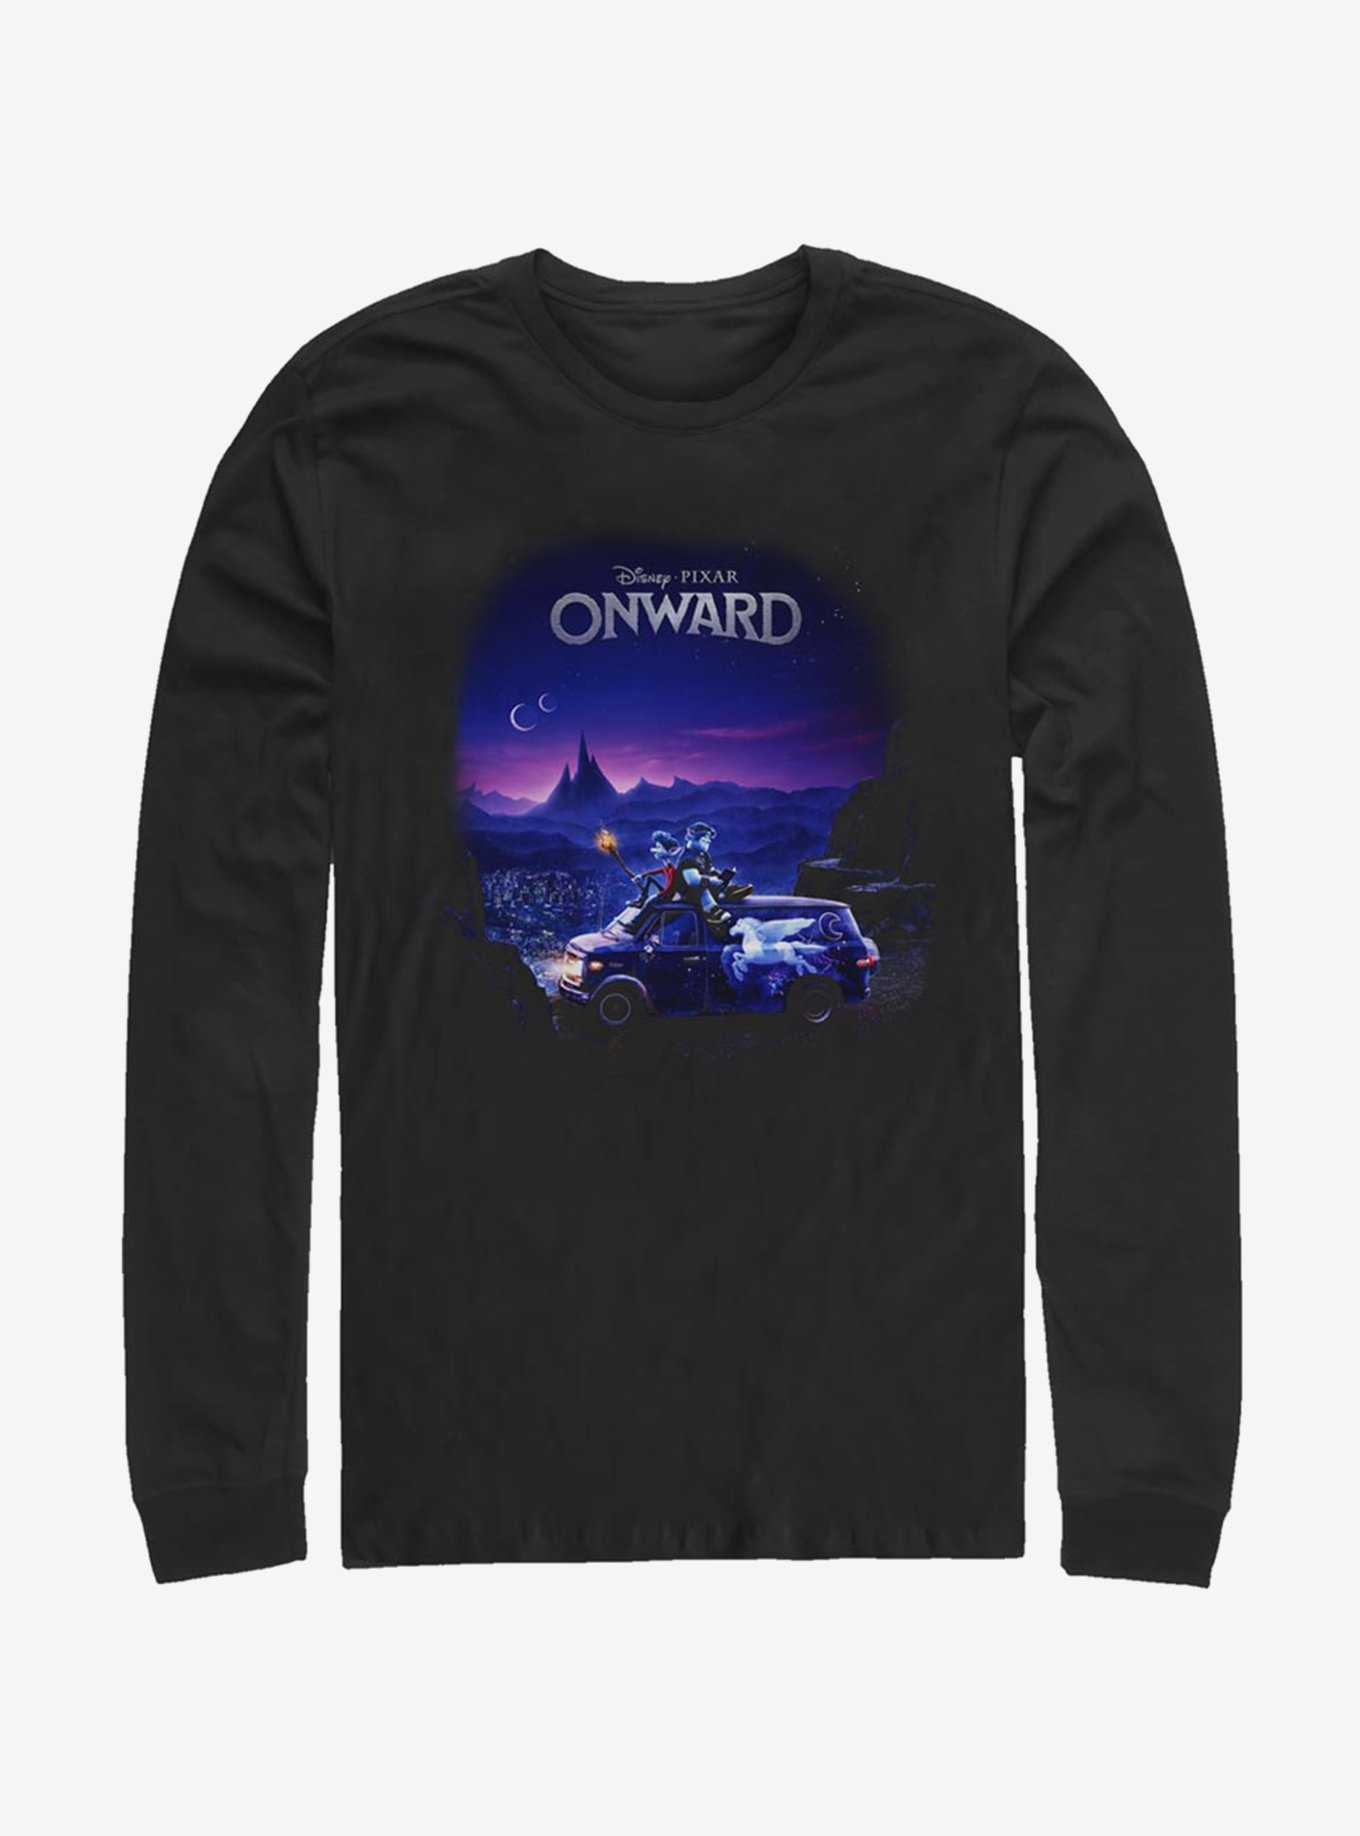 OFFICIAL Onward Movie Merchandise & T-Shirts | Hot Topic